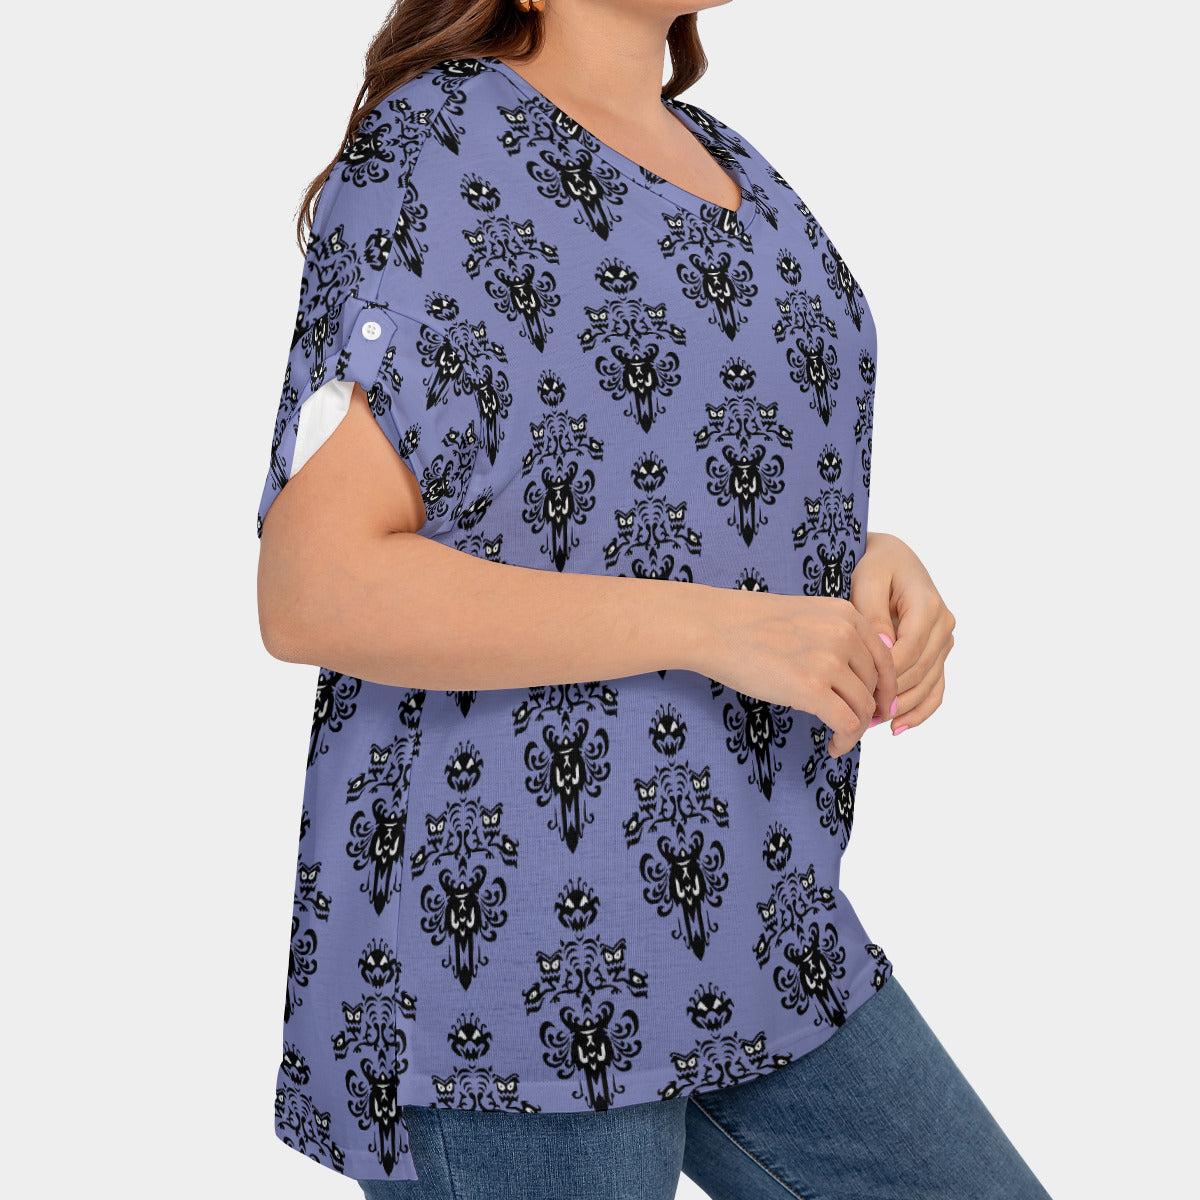 Haunted Mansion Wallpaper Women's Plus Size Short Sleeve T-shirt With Sleeve Loops